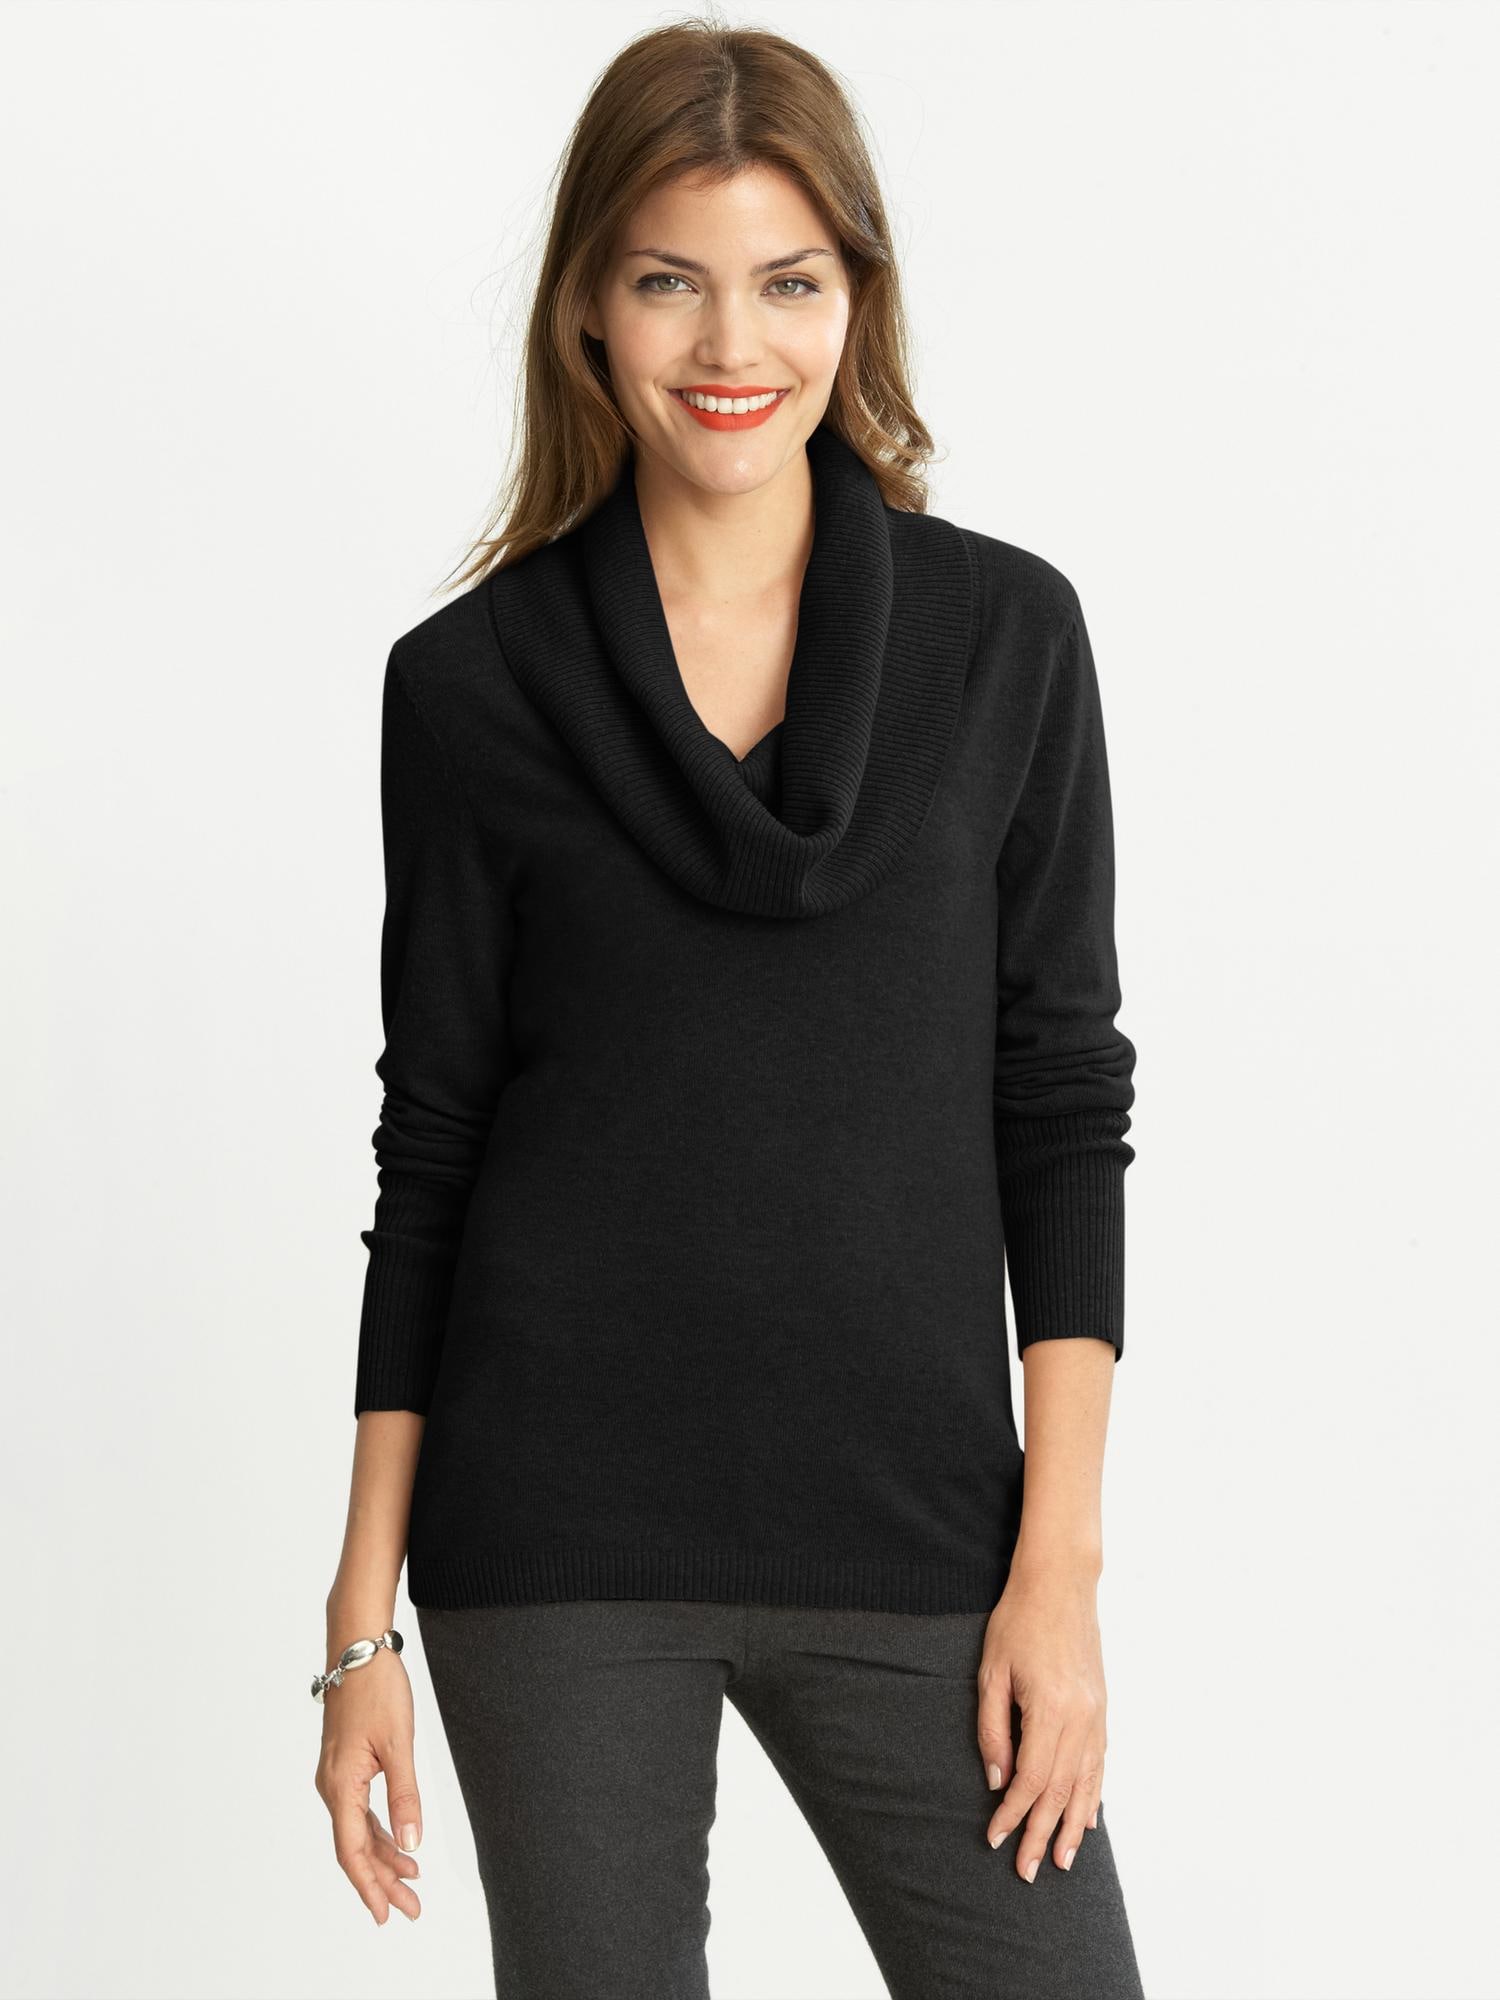 Cowlneck sweater